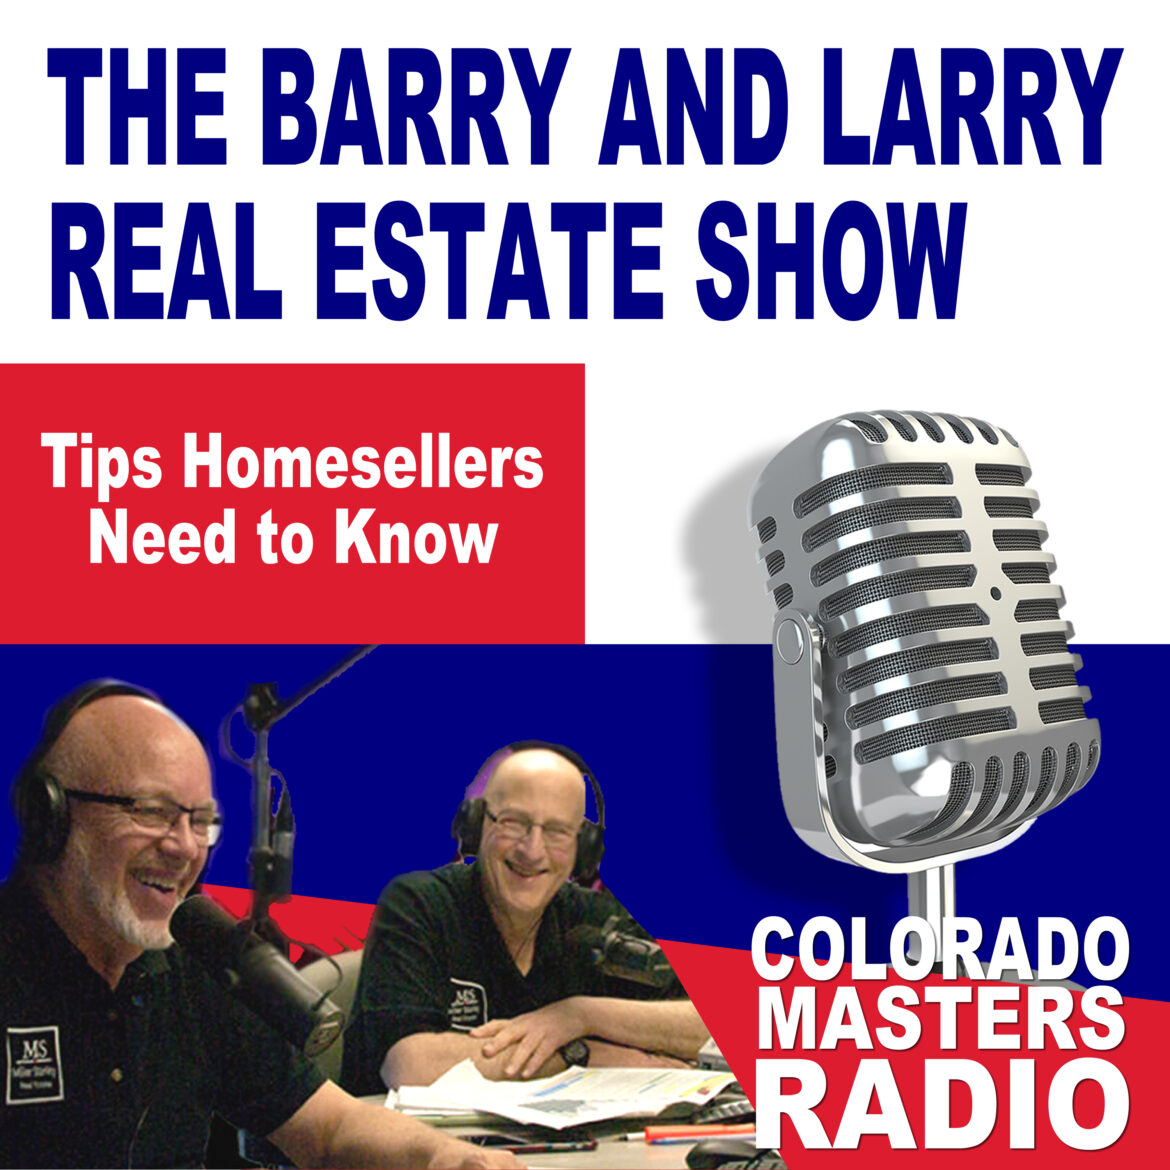 The Larry and Barry Real Estate Show - Tips Homesellers Need to Know